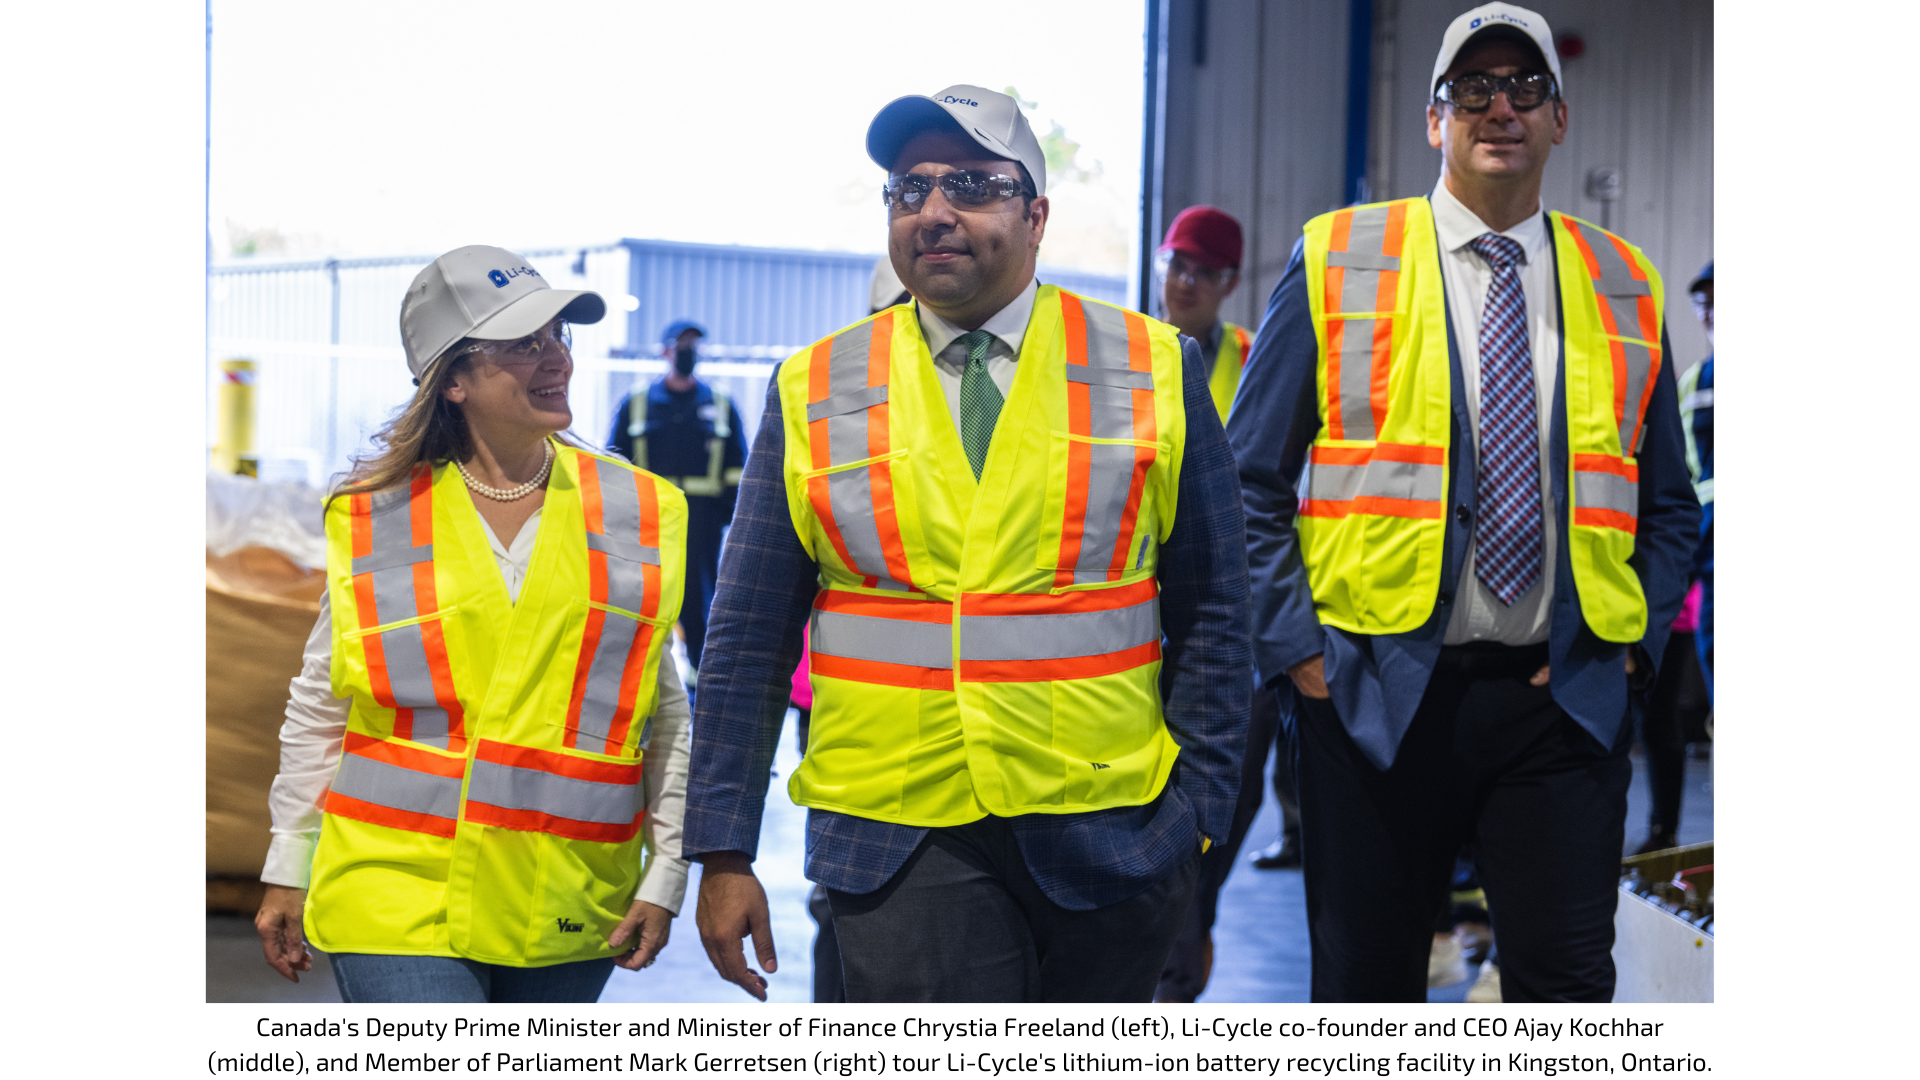 Canada's Deputy Prime Minister and Minister of Finance Chrystia Freeland (left), Li-Cycle co-founder and CEO Ajay Kochhar (middle), and Member of Parliament Mark Gerretsen (right) tour Li-Cycle's lithium-ion battery recycling facility in Kingston, Ontario.